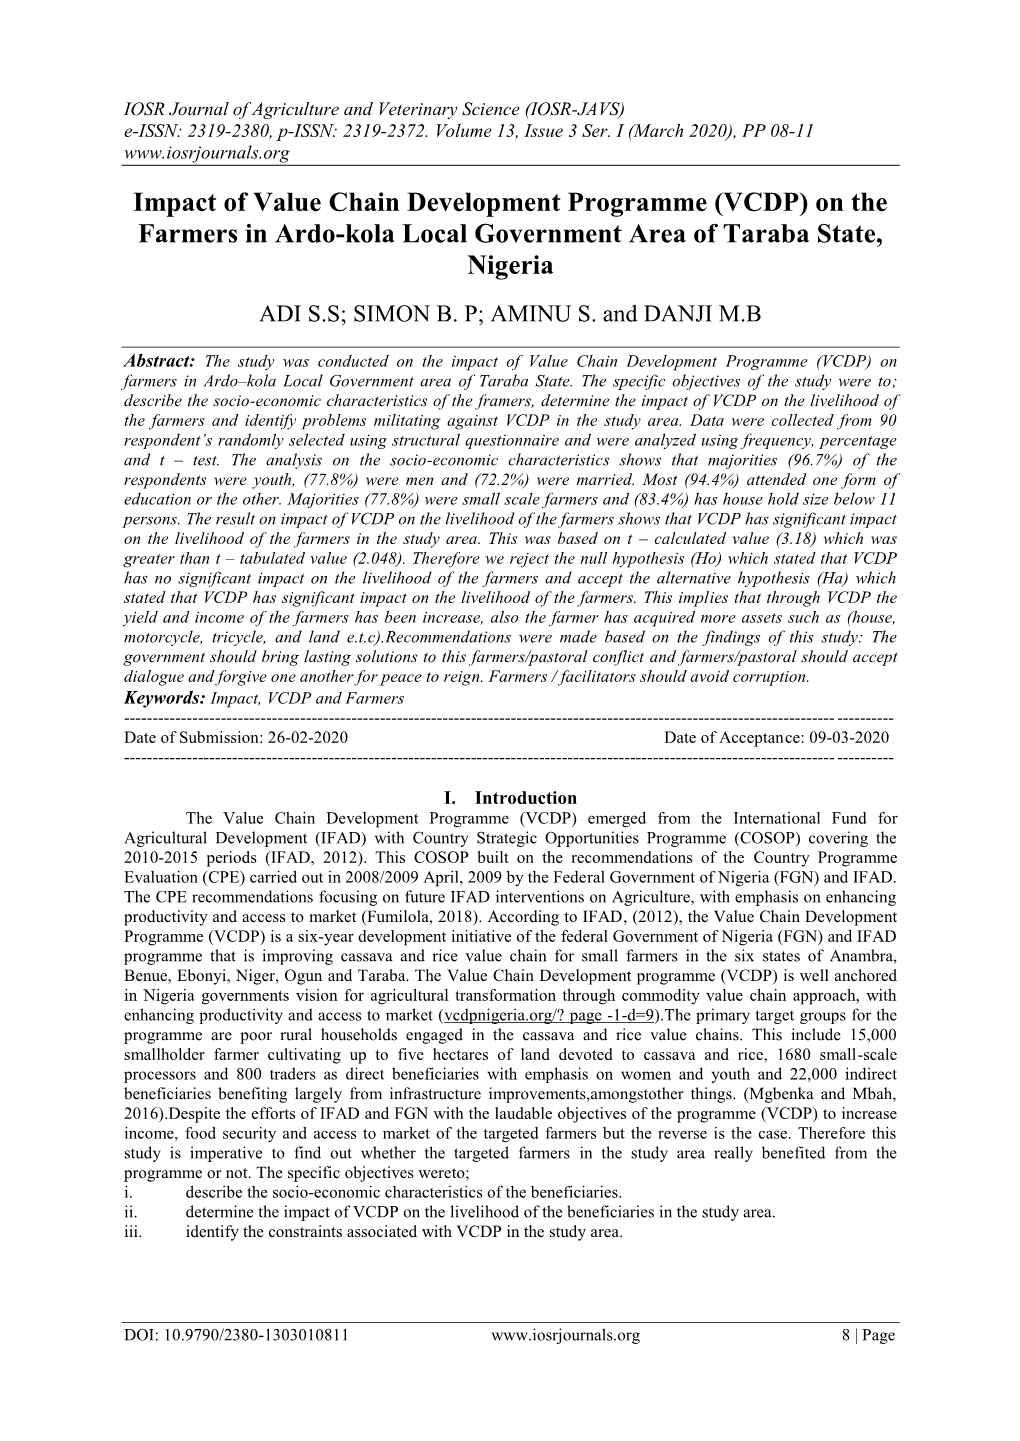 Impact of Value Chain Development Programme (VCDP) on the Farmers in Ardo-Kola Local Government Area of Taraba State, Nigeria